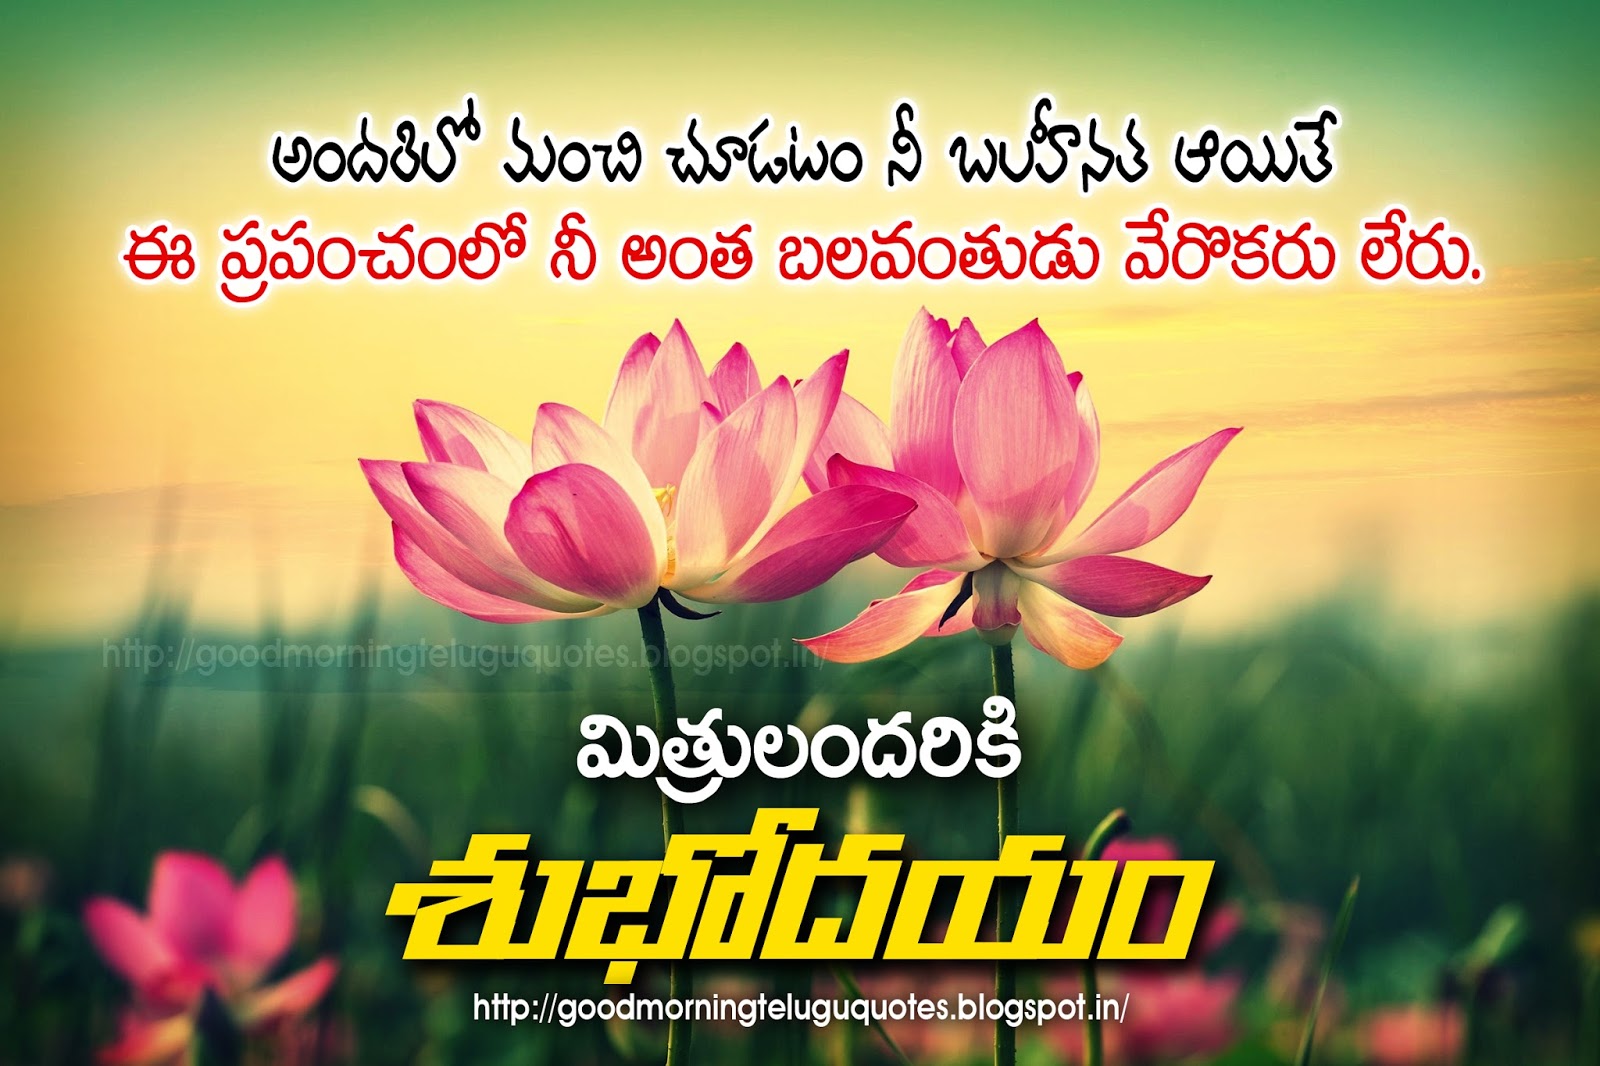 Best Telugu Good Morning Quotes wishes greetings